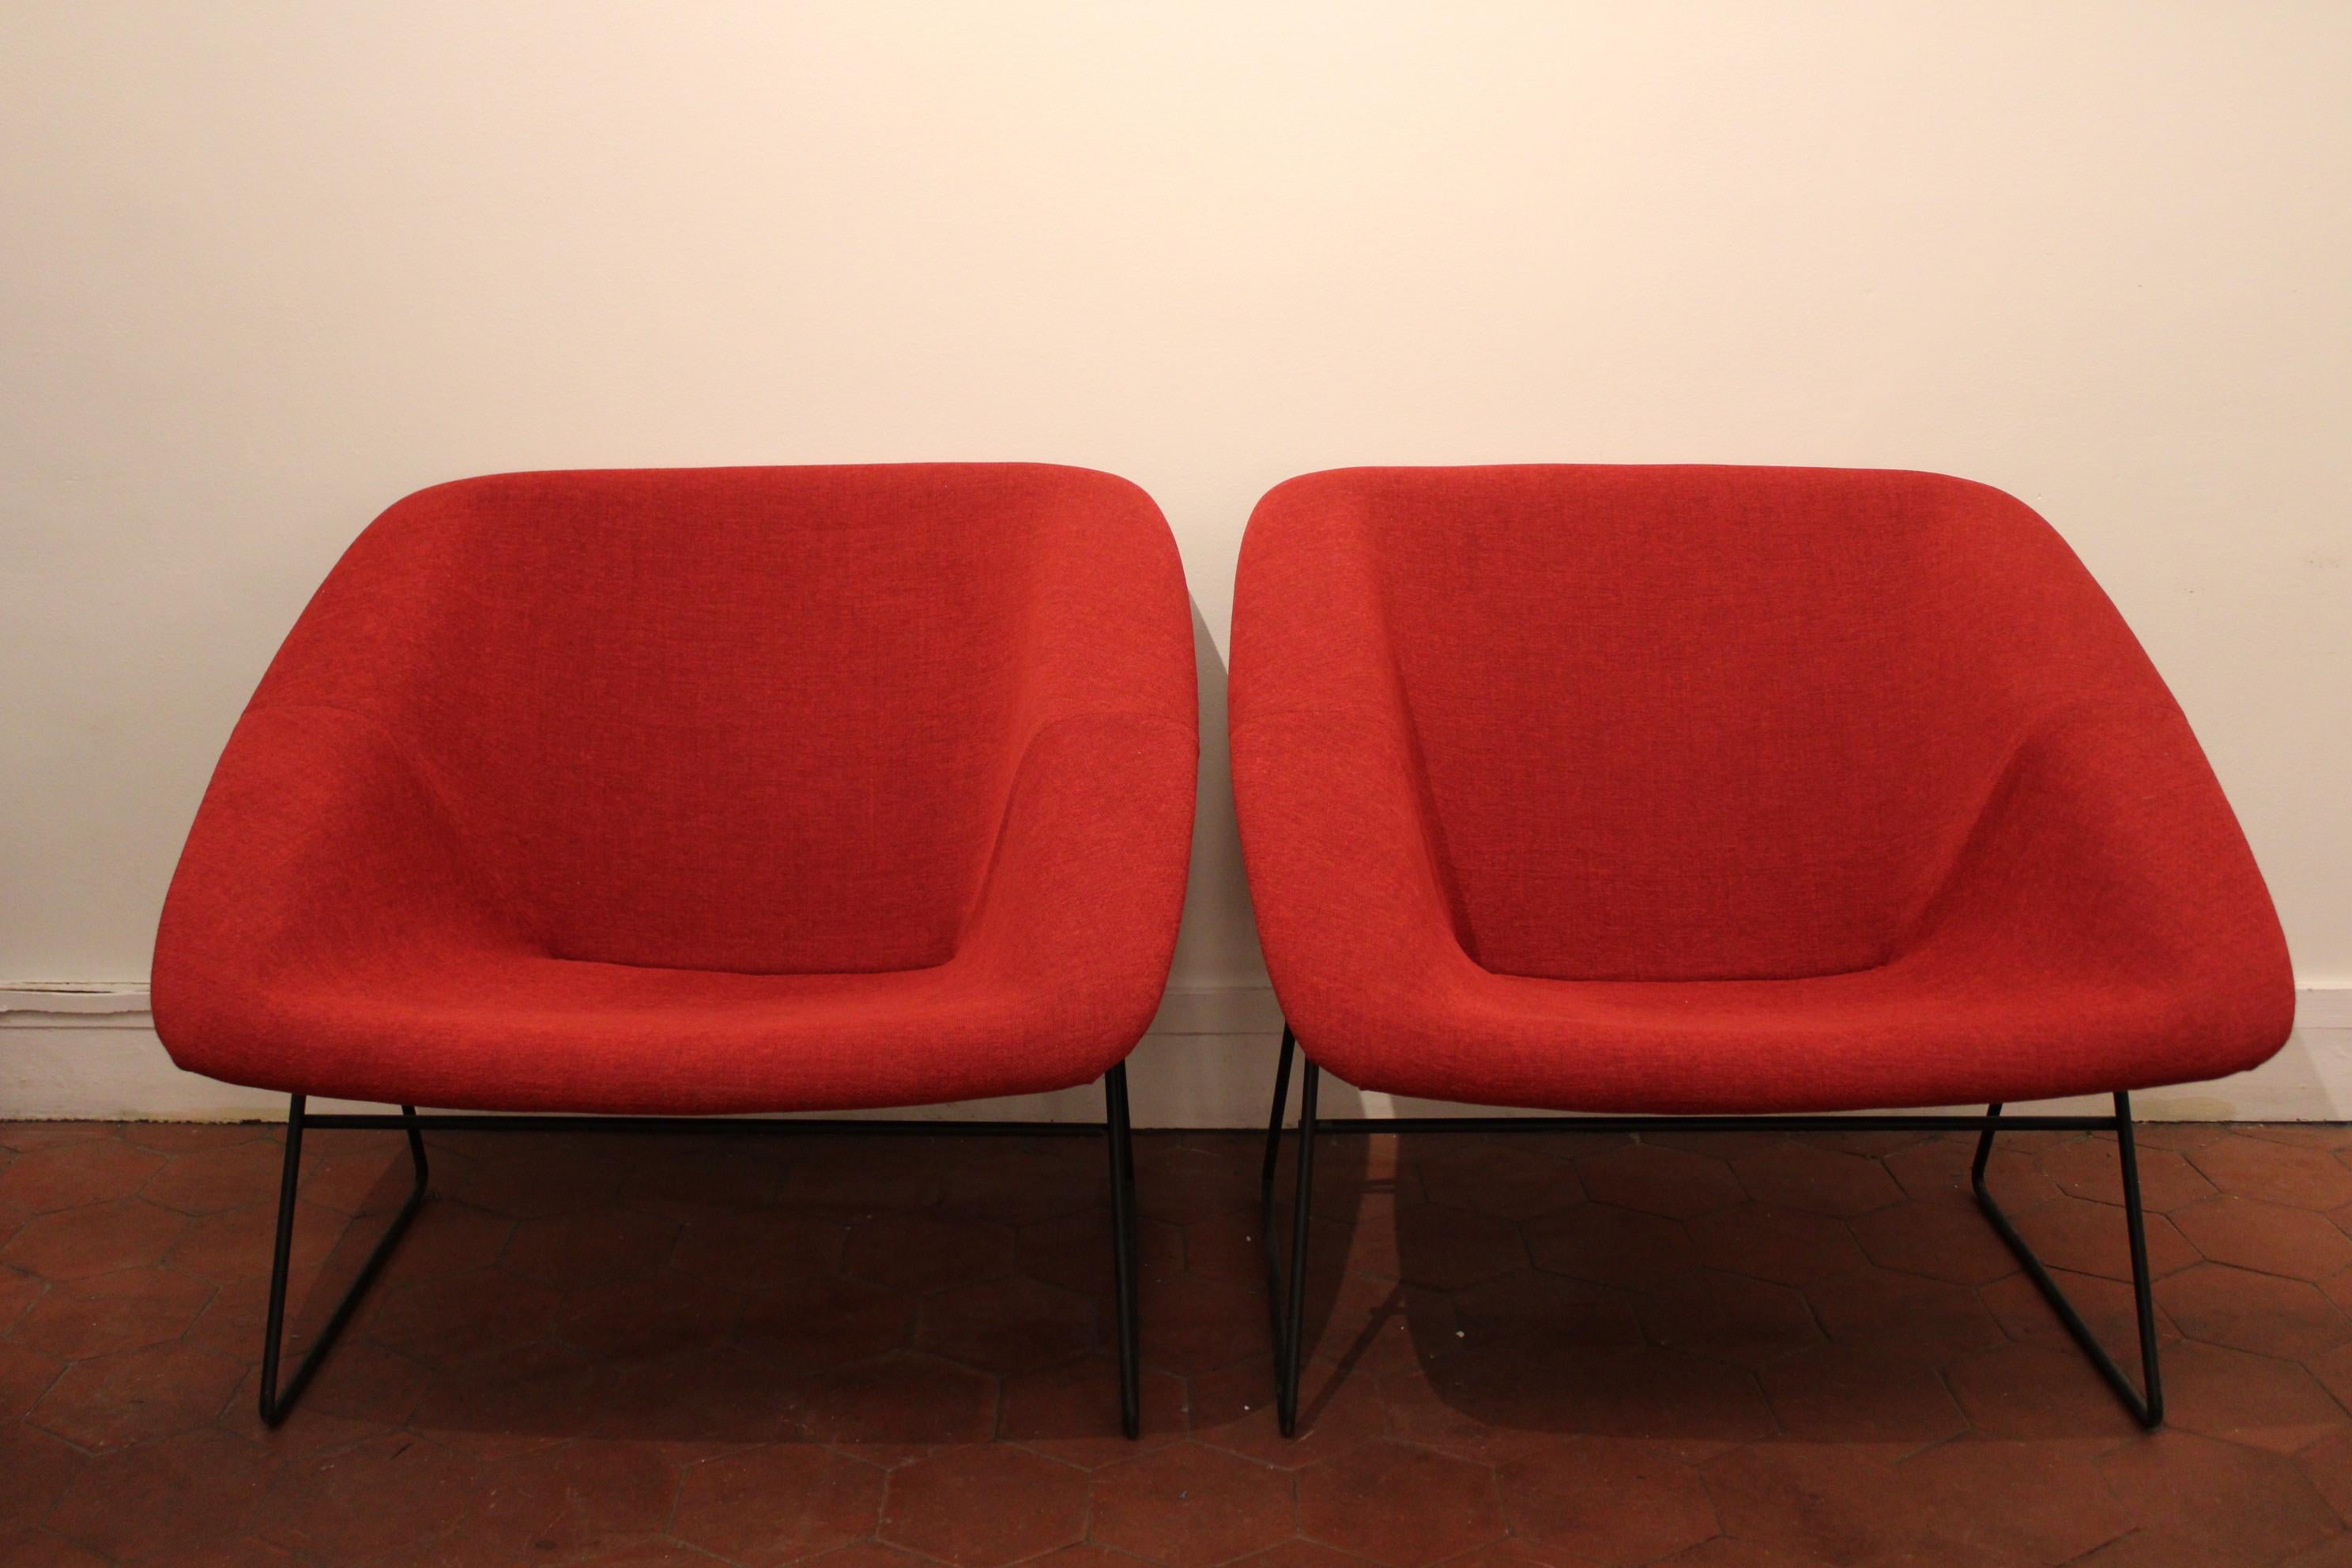 Pair of Corb armchairs by the A.R.P. (= plastic research workshop : Joseph Andre´ Motte, 
Pierre Guariche, Michel Mortier)
Edited by Steiner. France, circa 1956. 
Black lacquered metal, red fabric.

Height : 70 cm x Seat : 40 cm, Width: 80 cm.